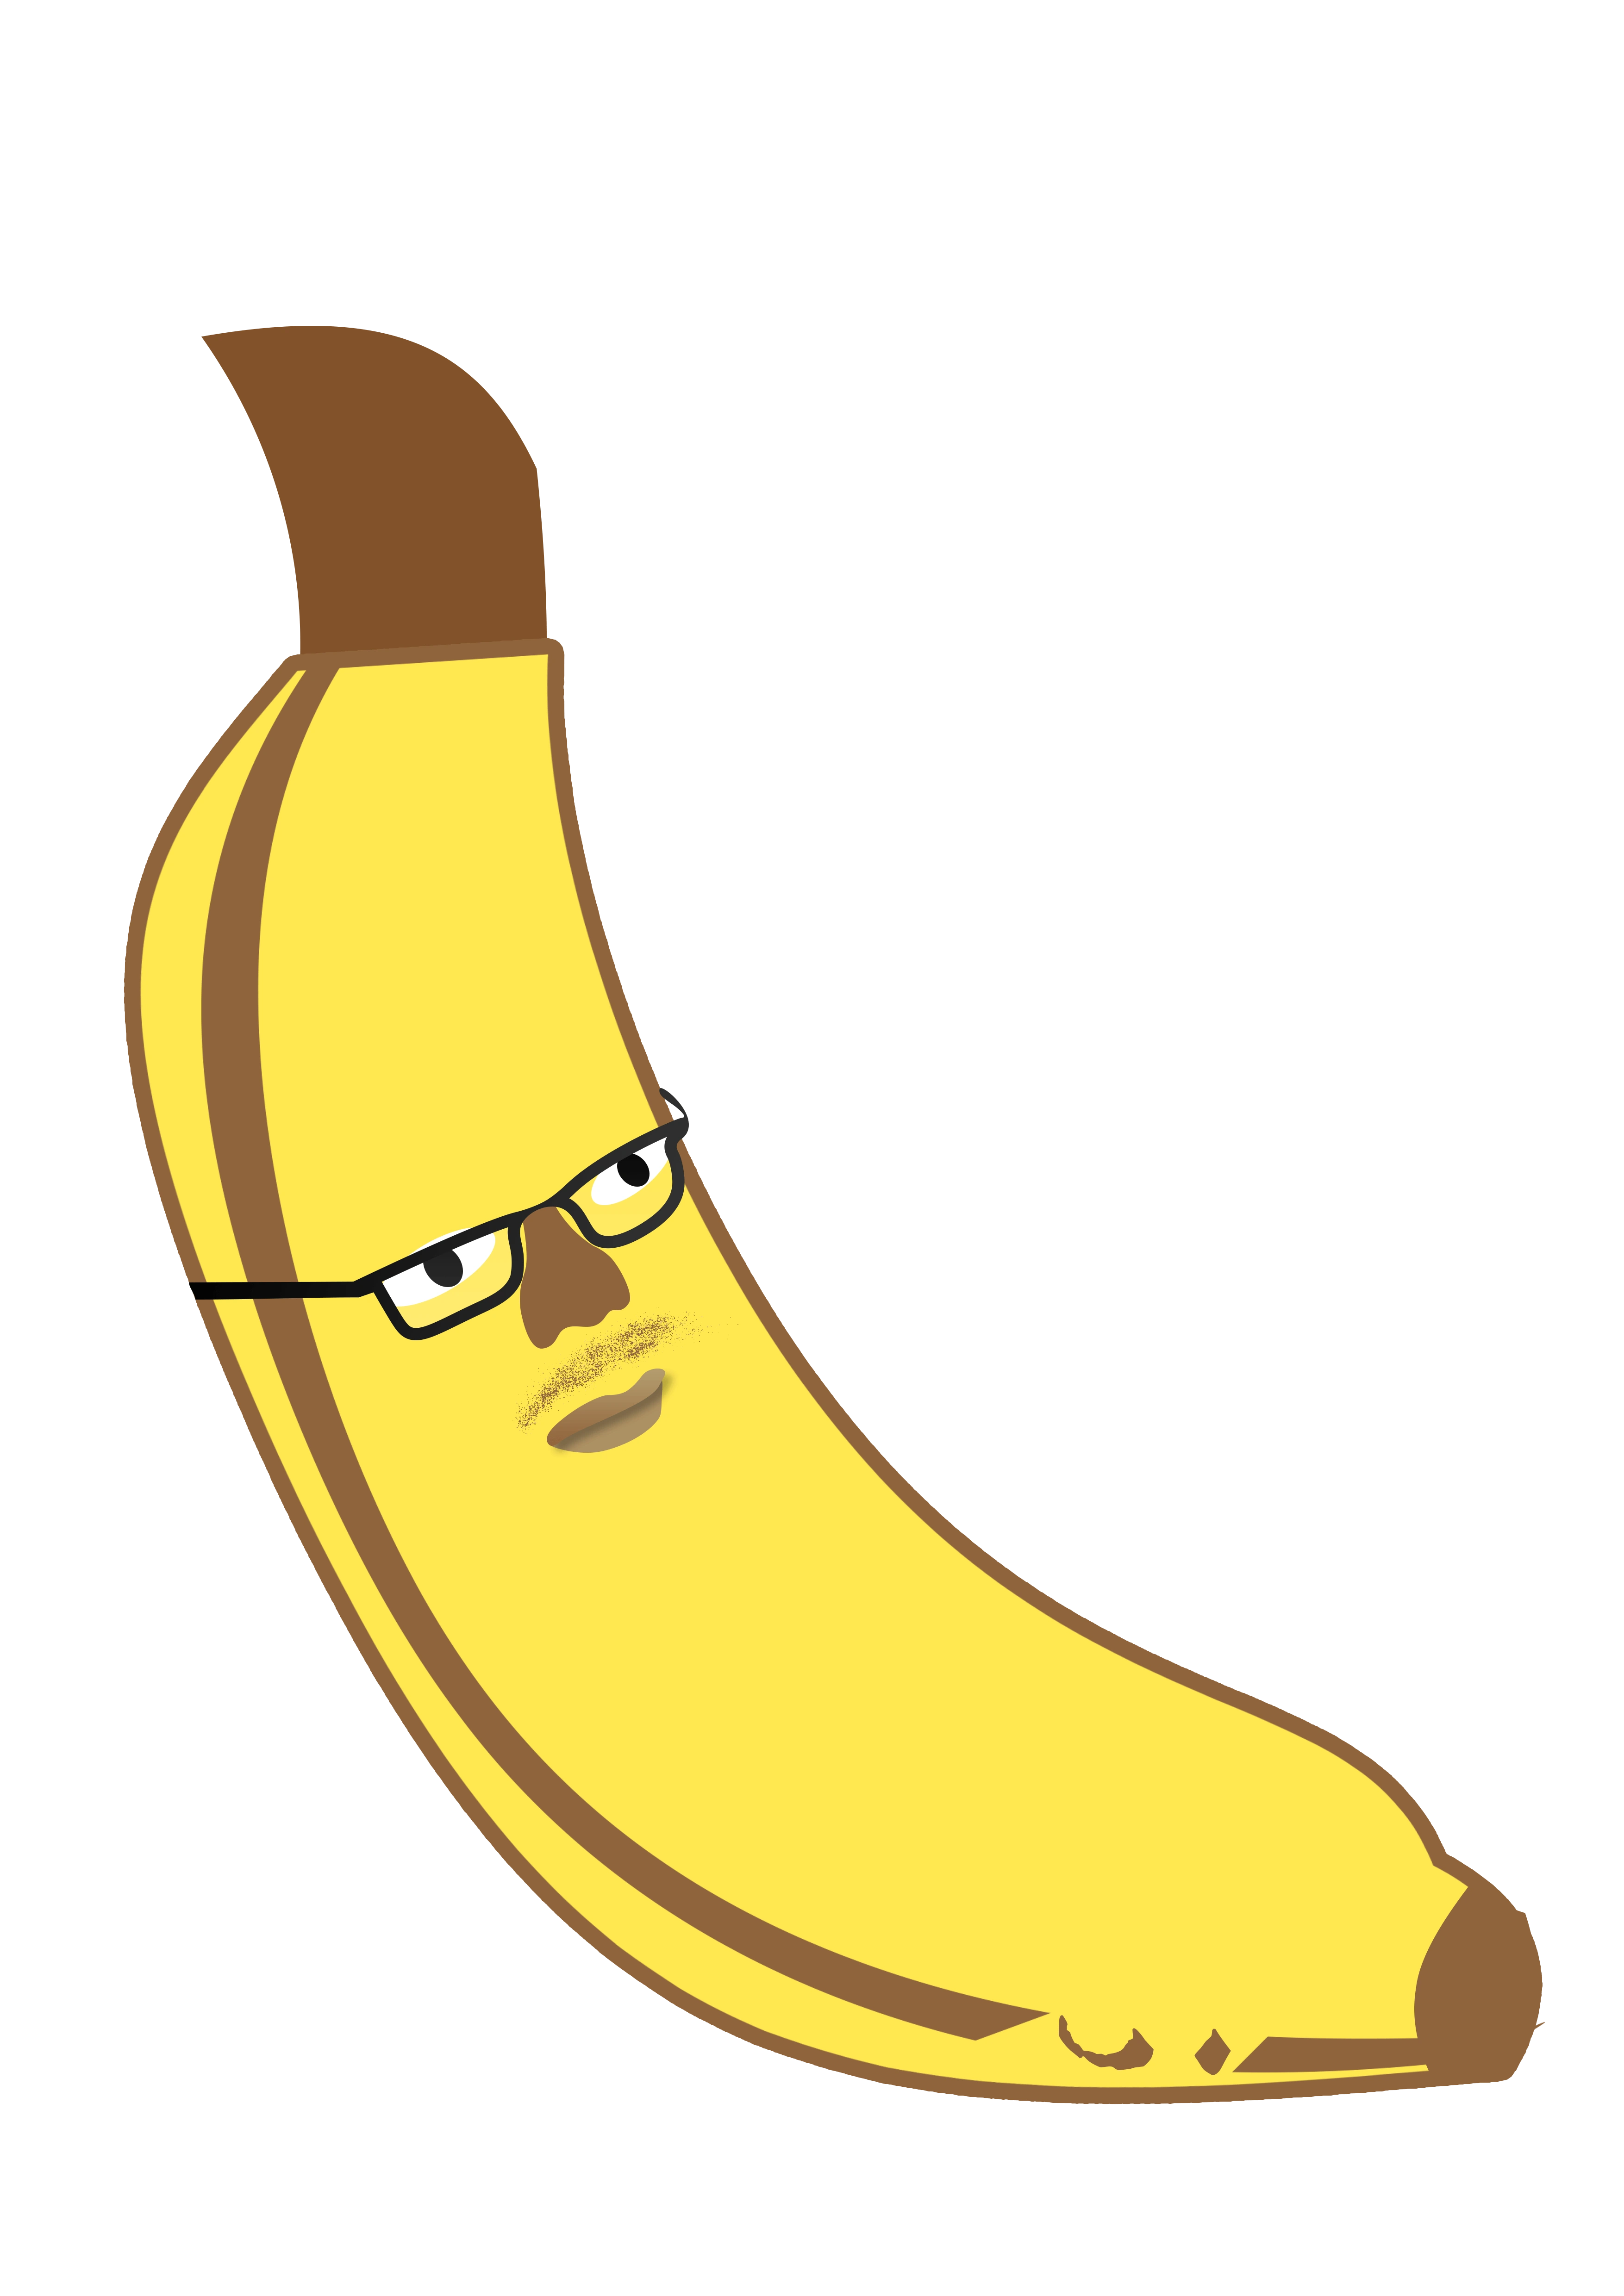 item in the game, face banana